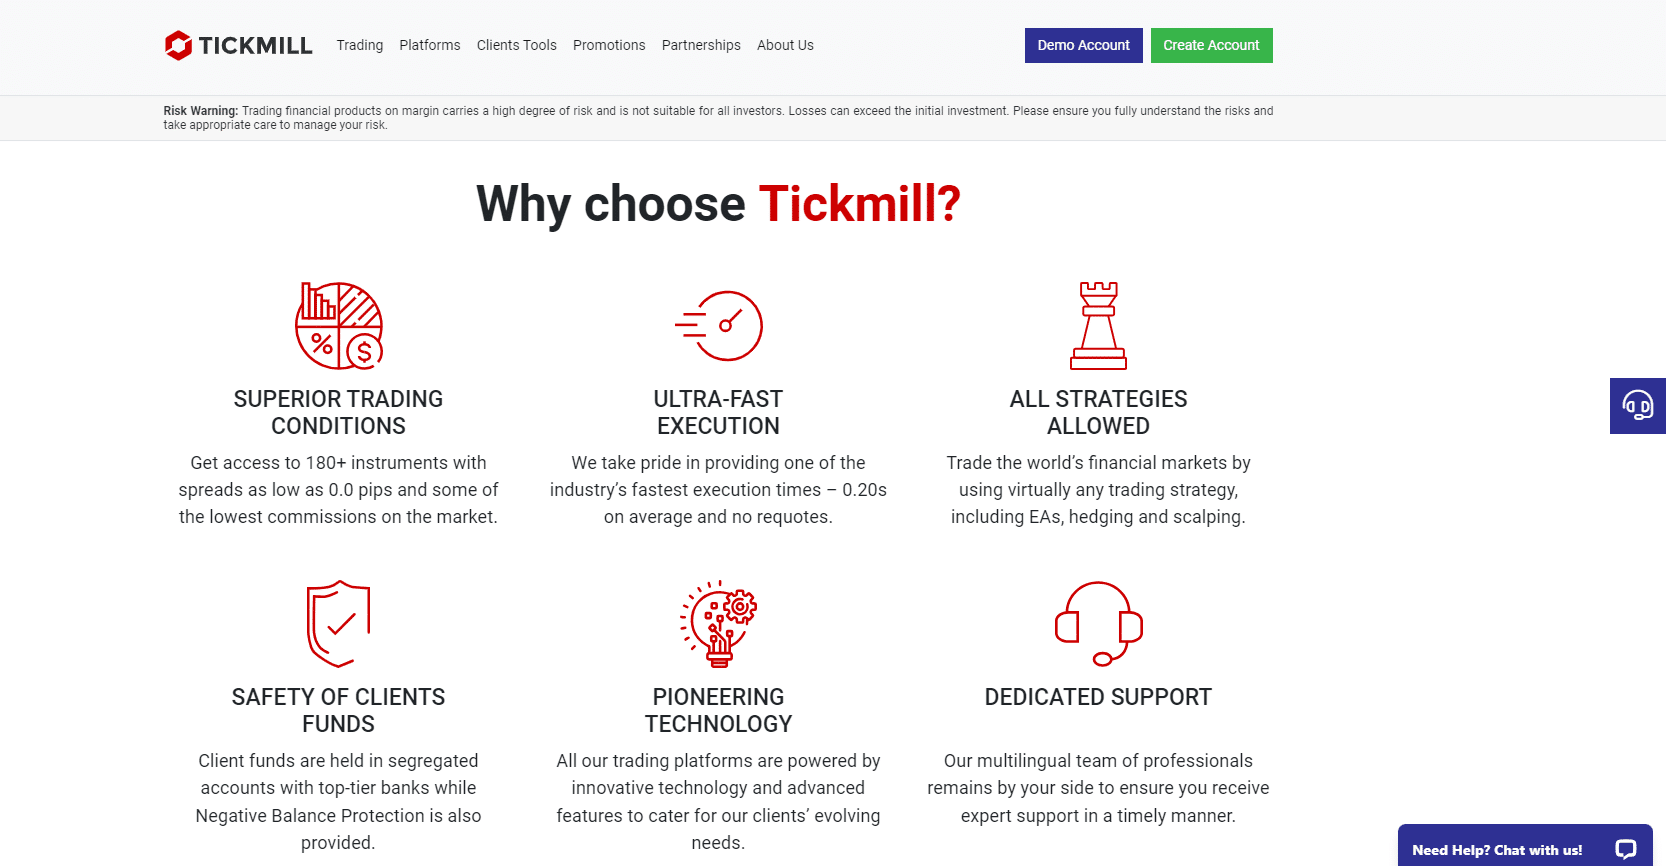 Tickmill who will benefit